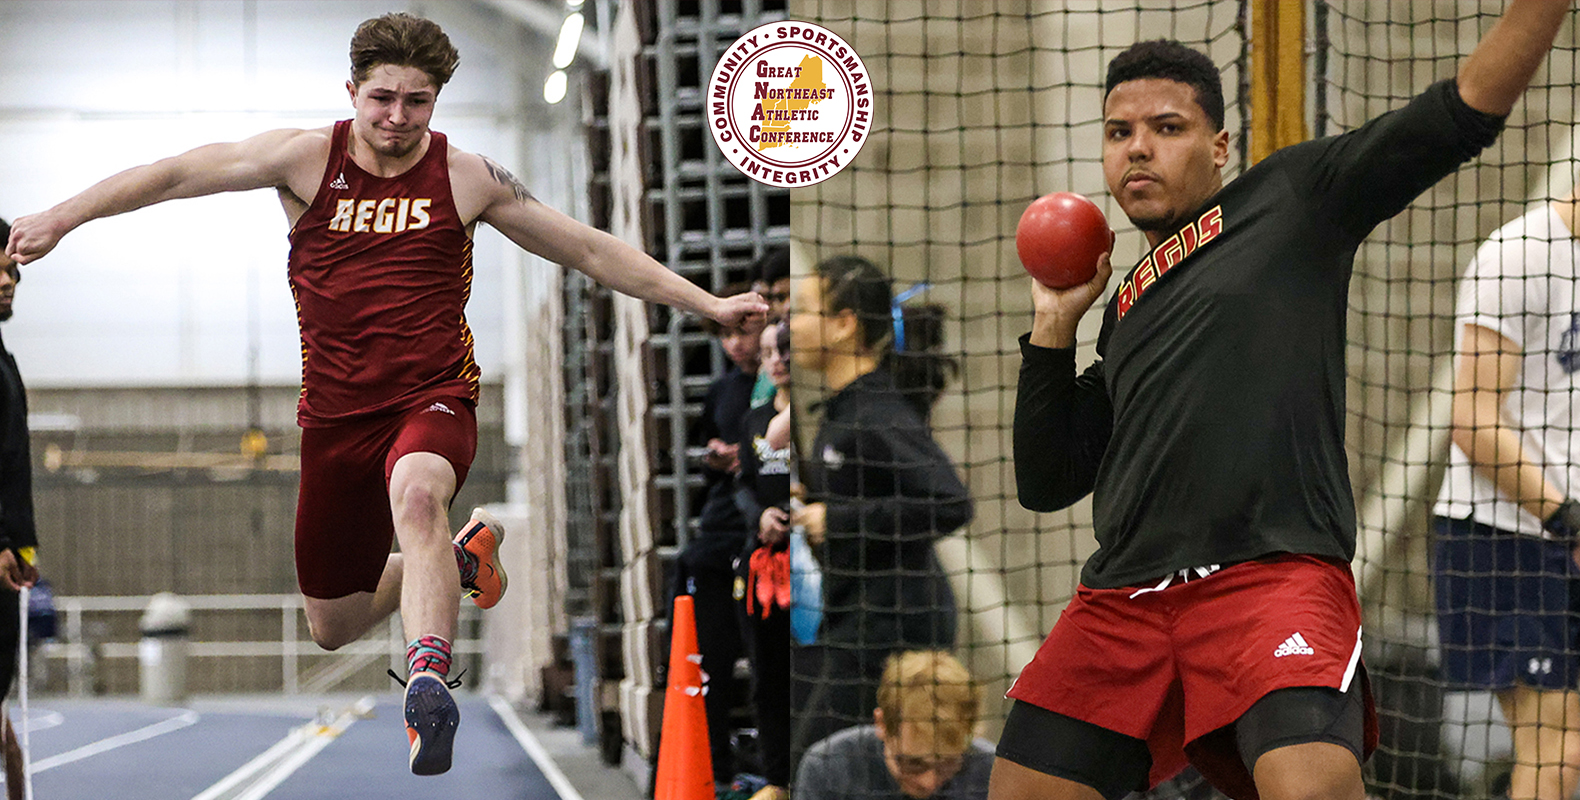 Thuotte, Abreu Earn GNAC Recognition from Indoor Track & Field Season